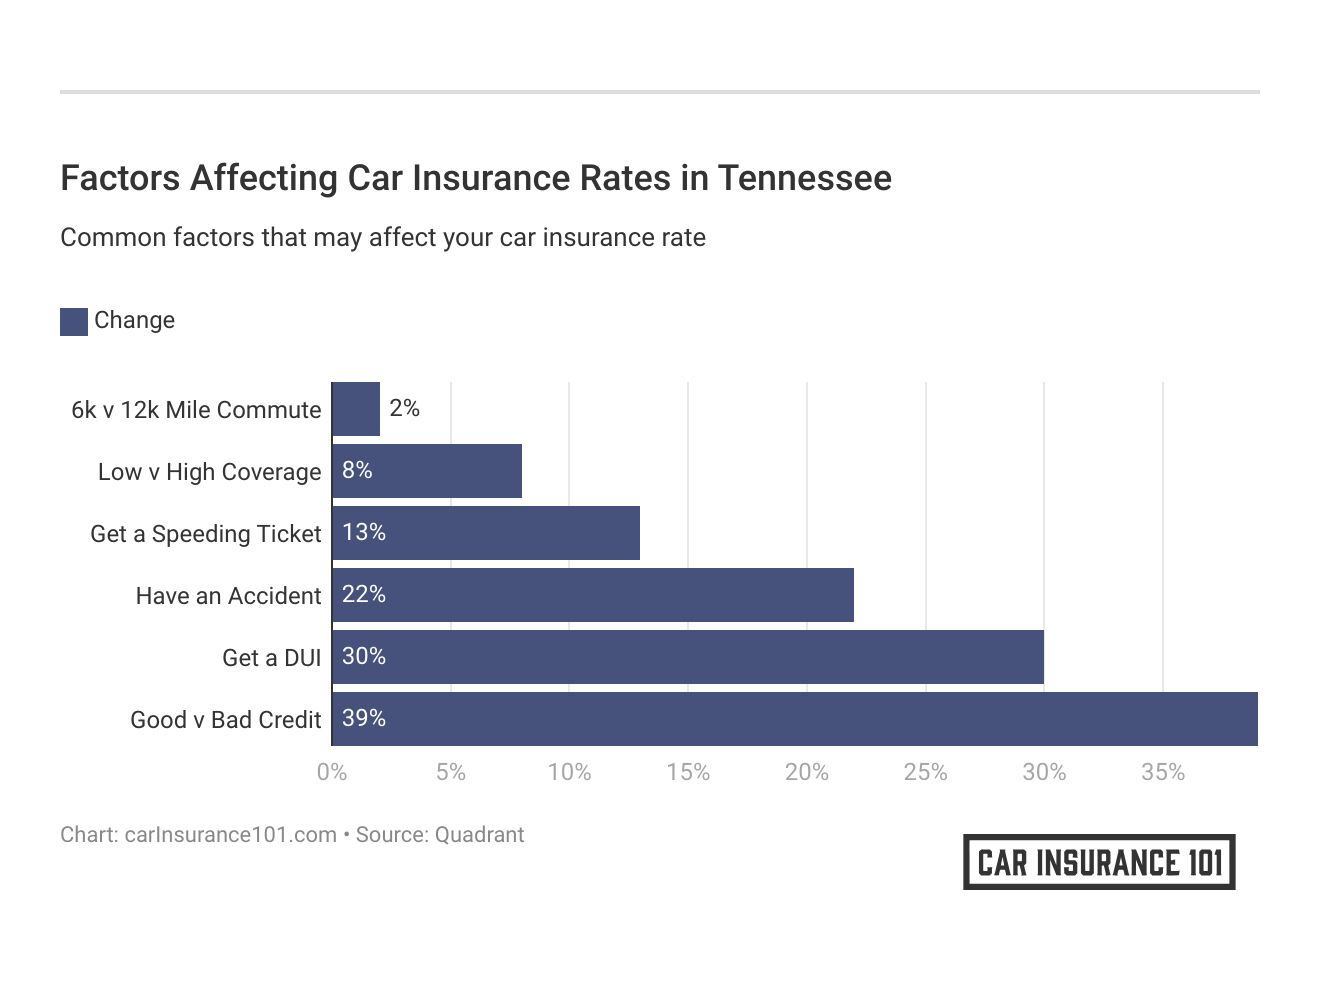 <h3>Factors Affecting Car Insurance Rates in Tennessee</h3>